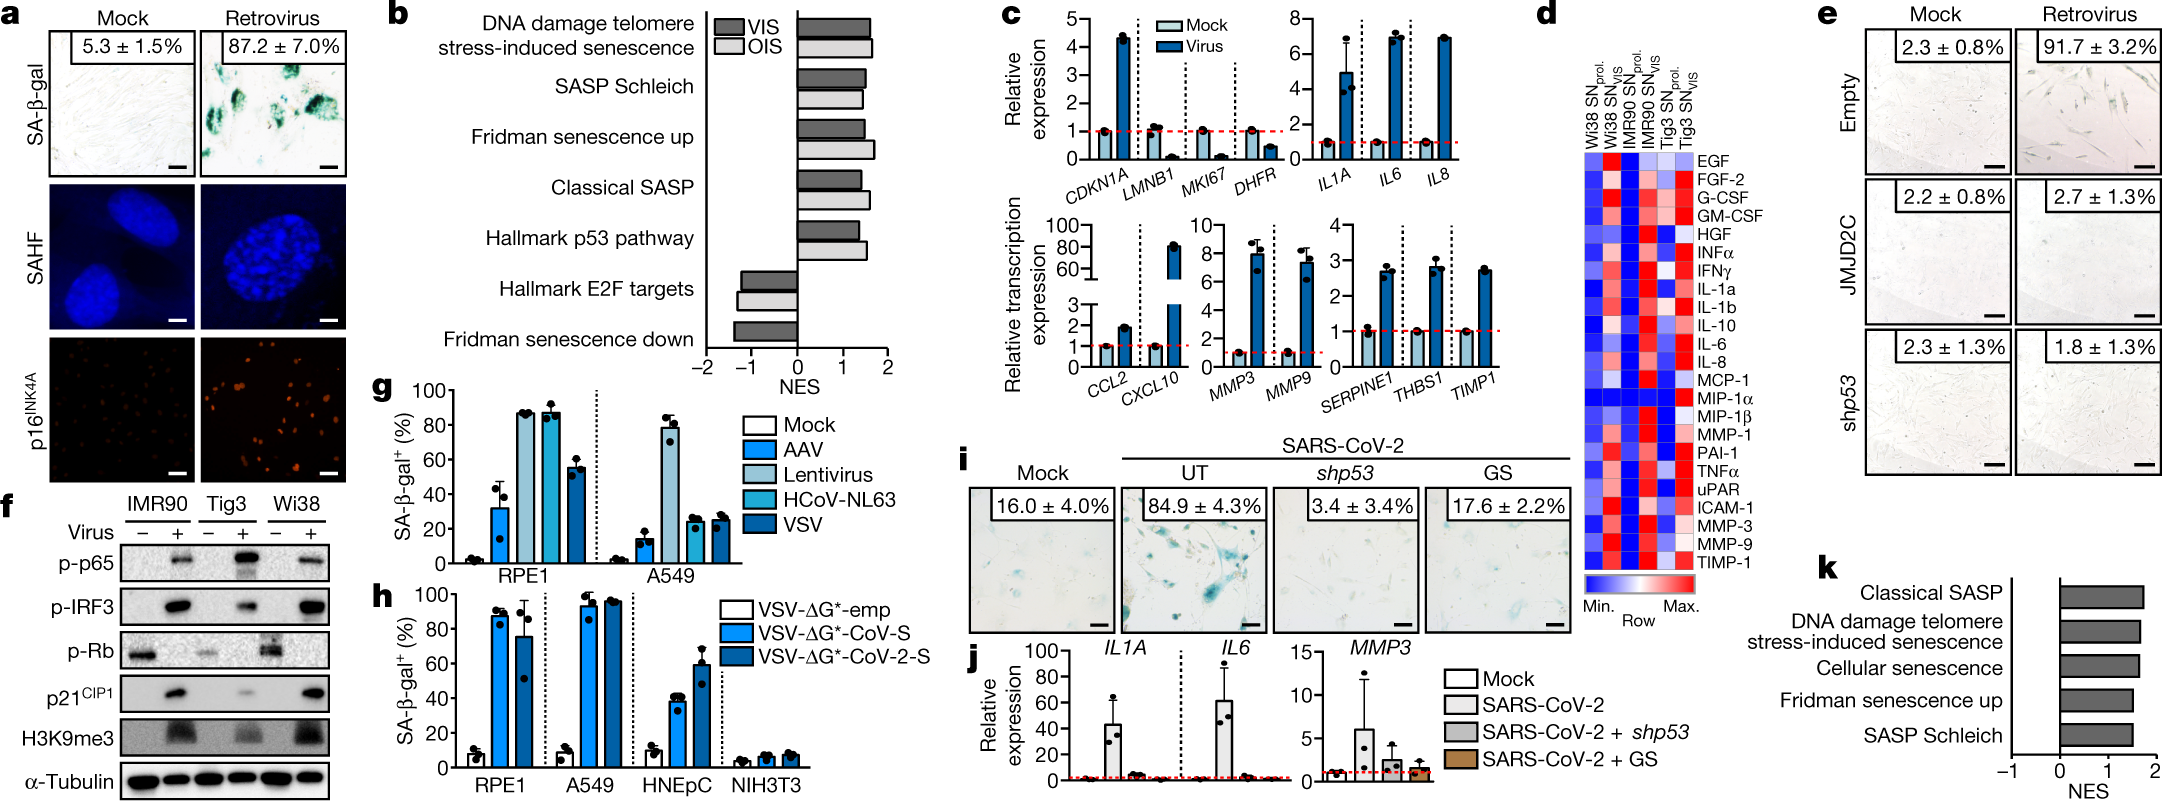 Virus-induced senescence is a driver and therapeutic target in COVID-19 |  Nature